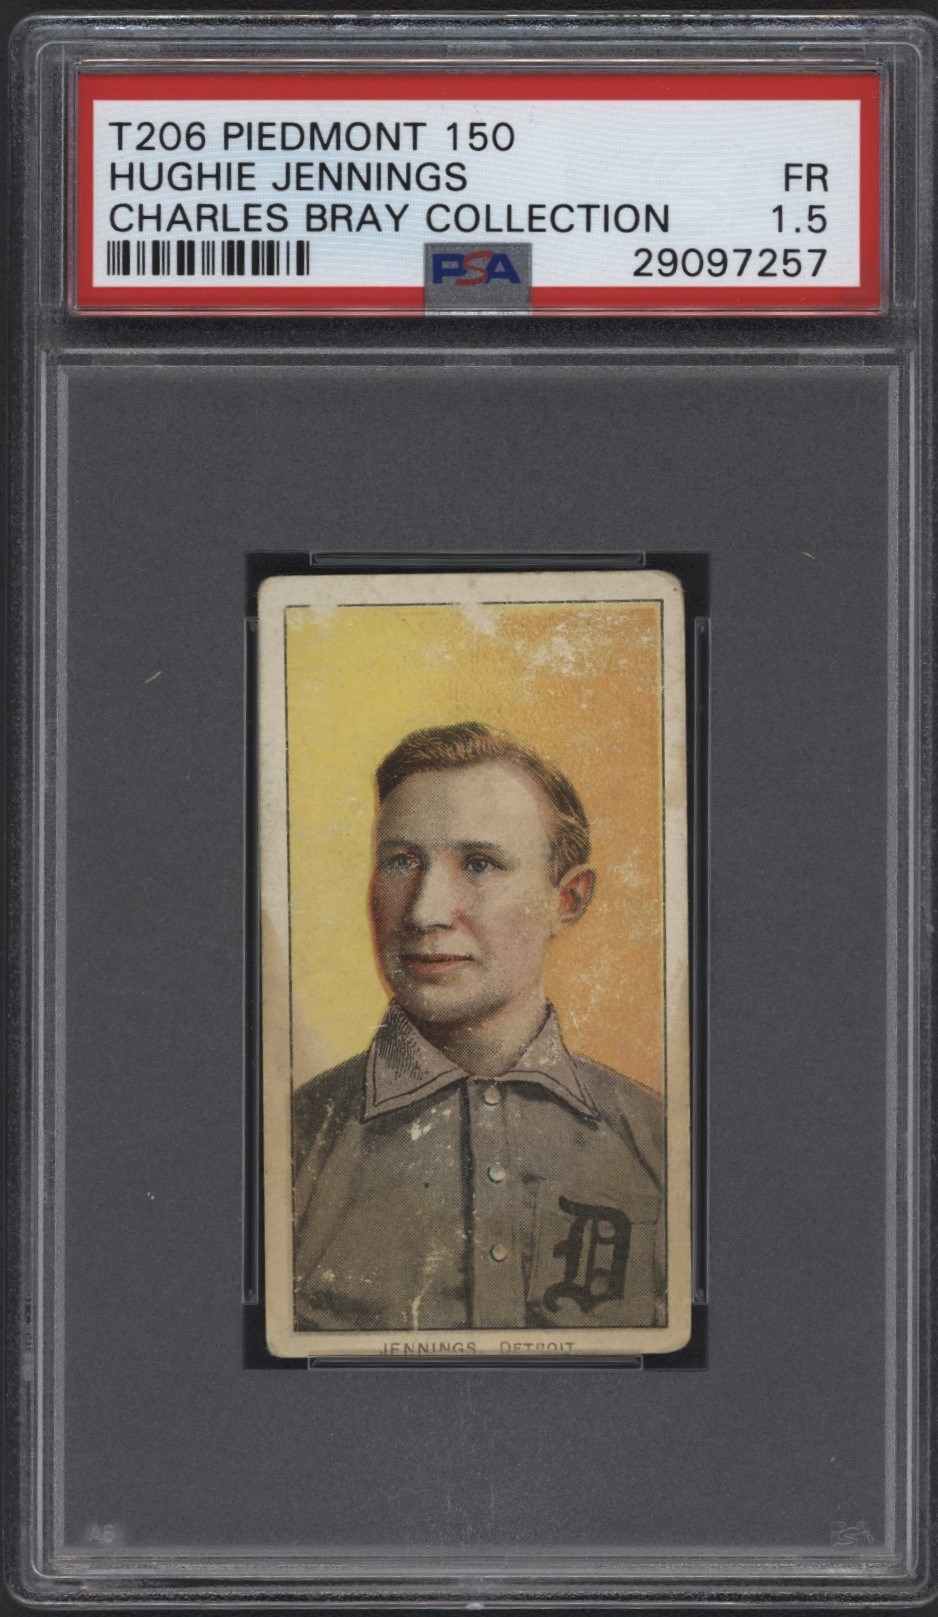 T206 Piedmont 150 Hughie Jennings Portrait PSA 1.5 From the Charles Bray Collection